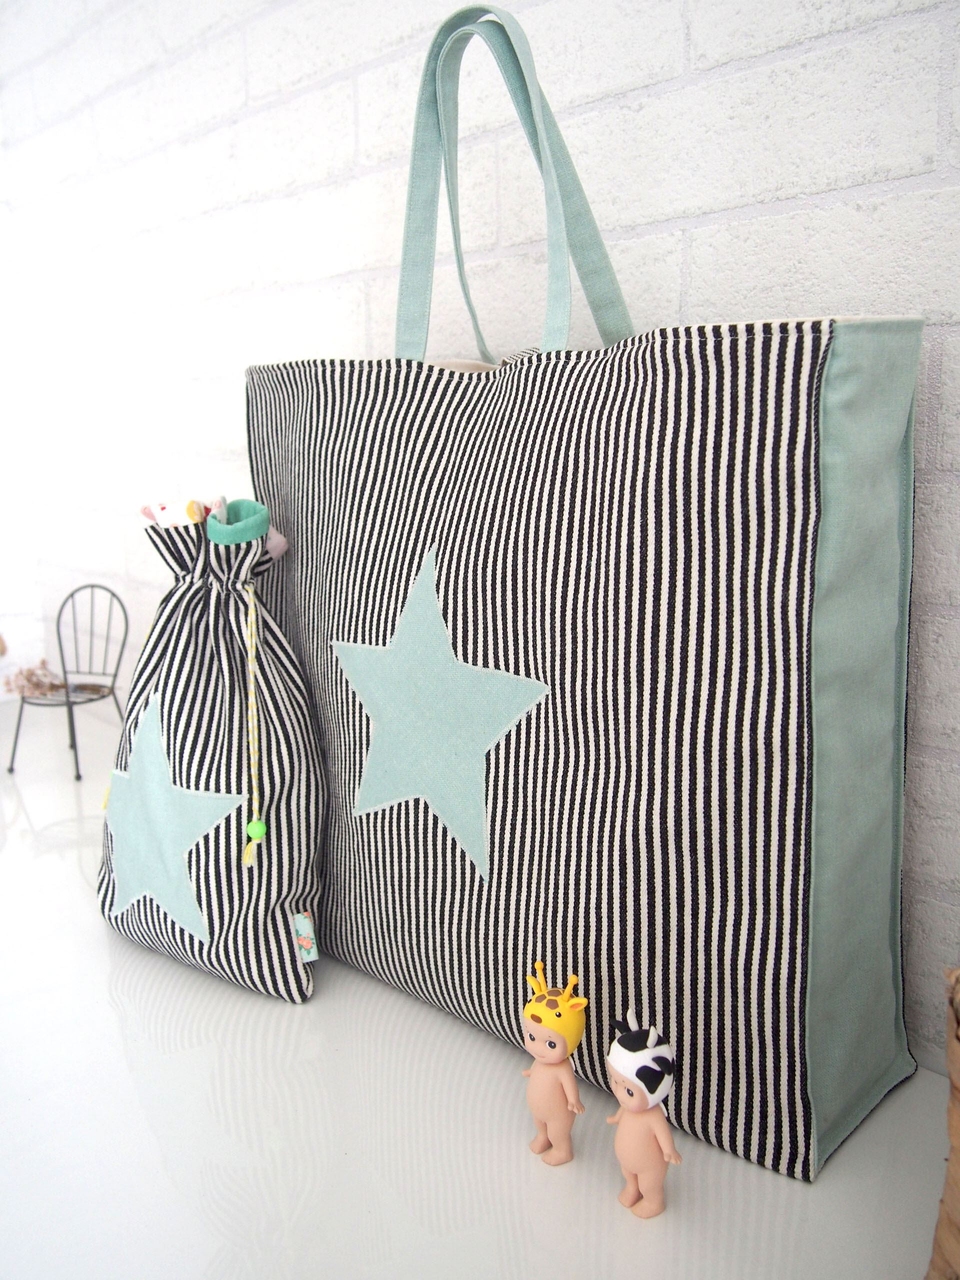 How To Sew a Tote Bag. Classic Tote Tutorial